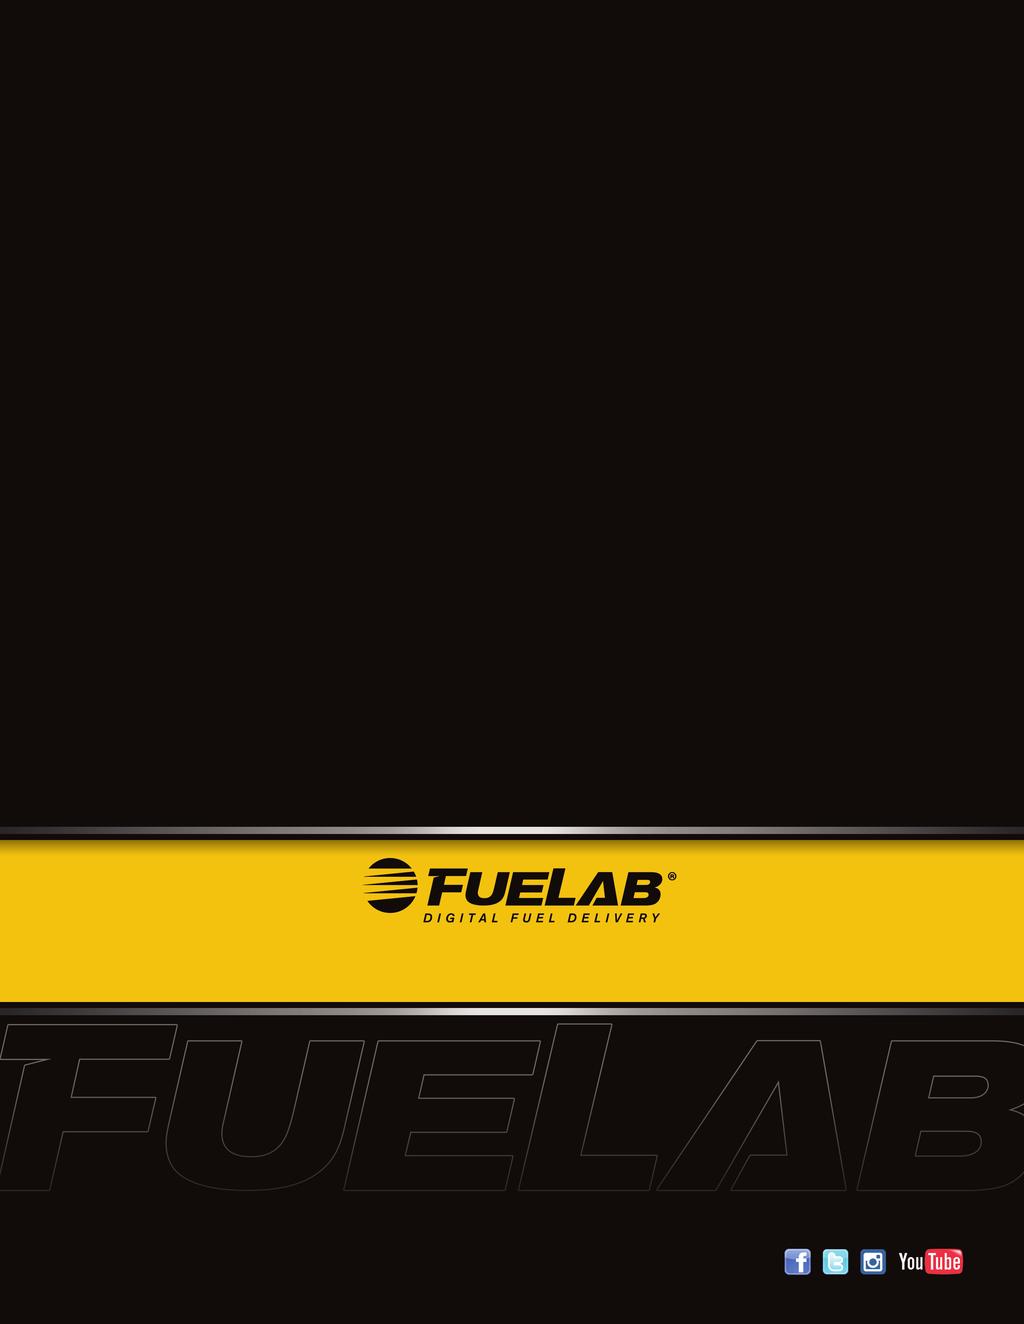 ORDERING: FUELAB operating hours are Monday through Friday, 8:00 AM to 5:00PM Central Time. You can reach us Worldwide at 618.344.3300, orders can be faxed to 844.272.1189 or email us at info@fuelab.